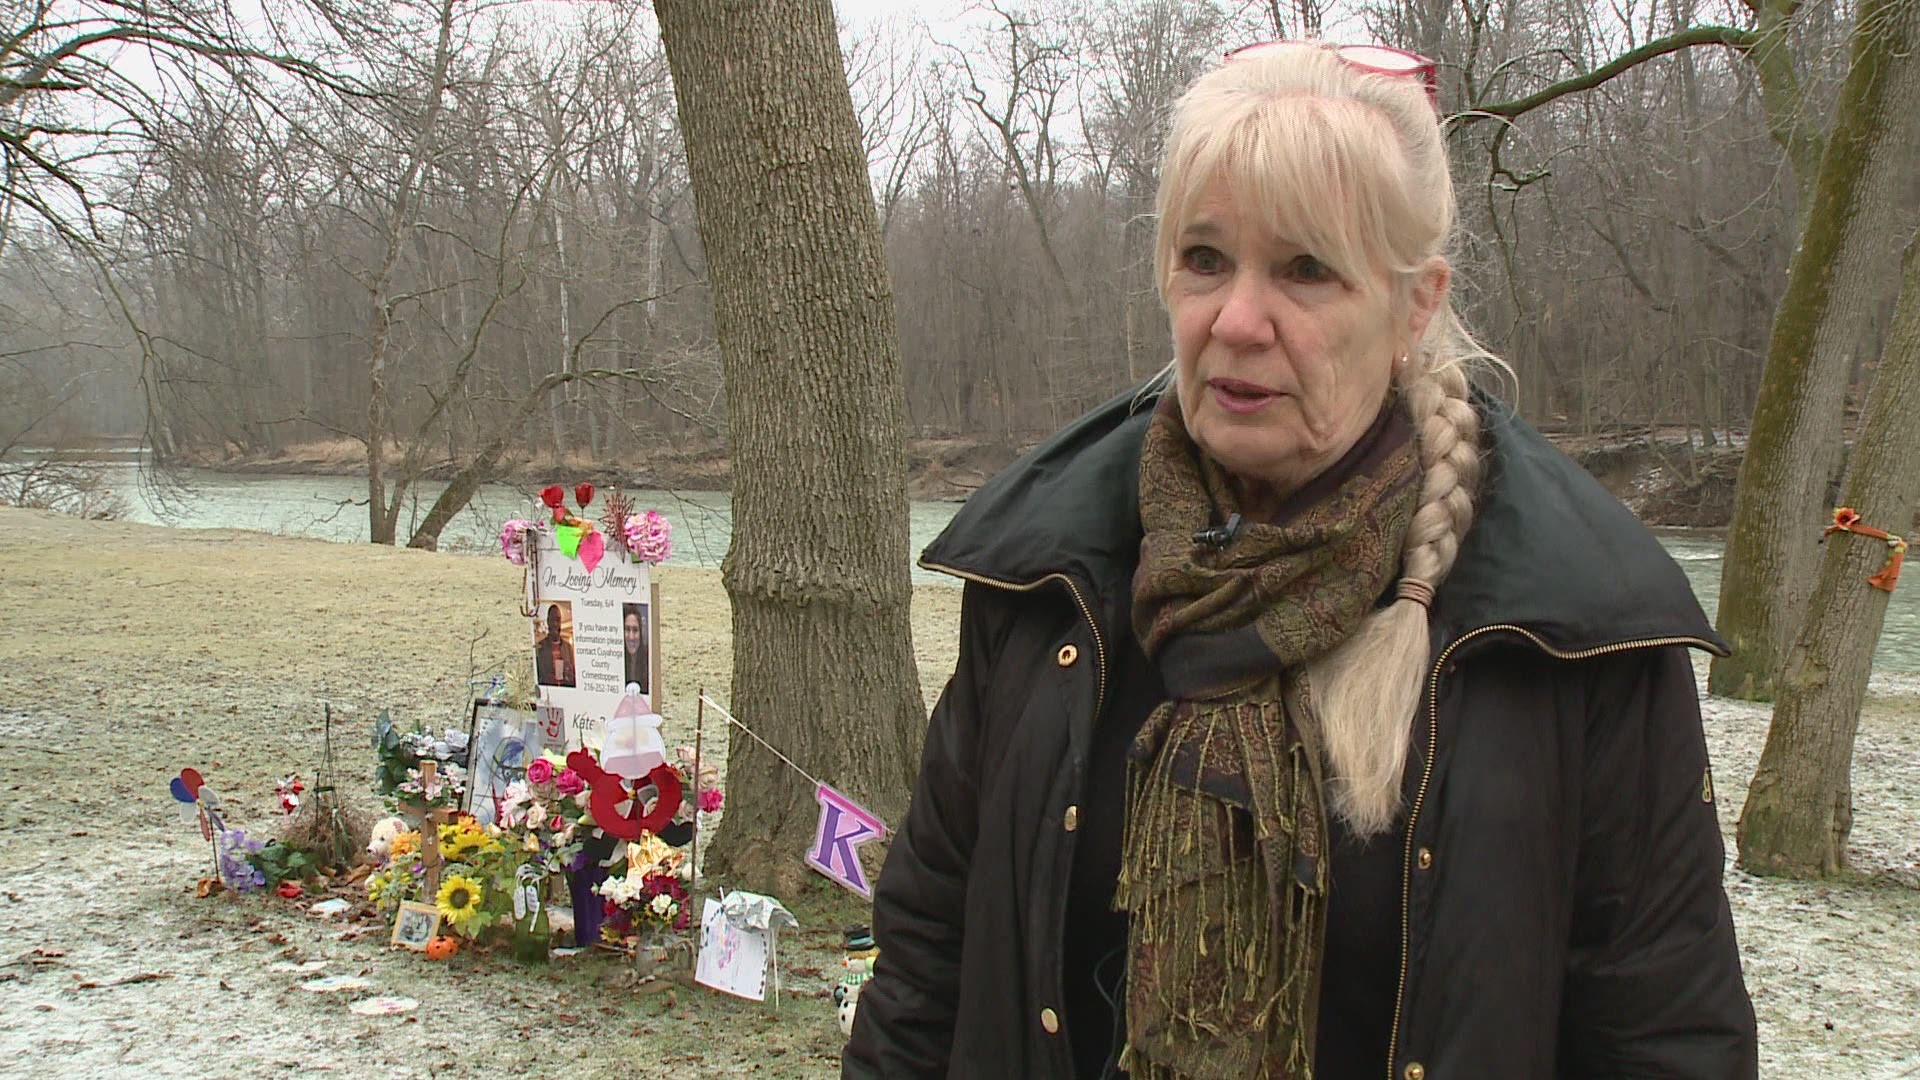 The mother of Katherine Brown, who was murdered in the Rocky River Reservation last year, is urging someone to come forward with information.